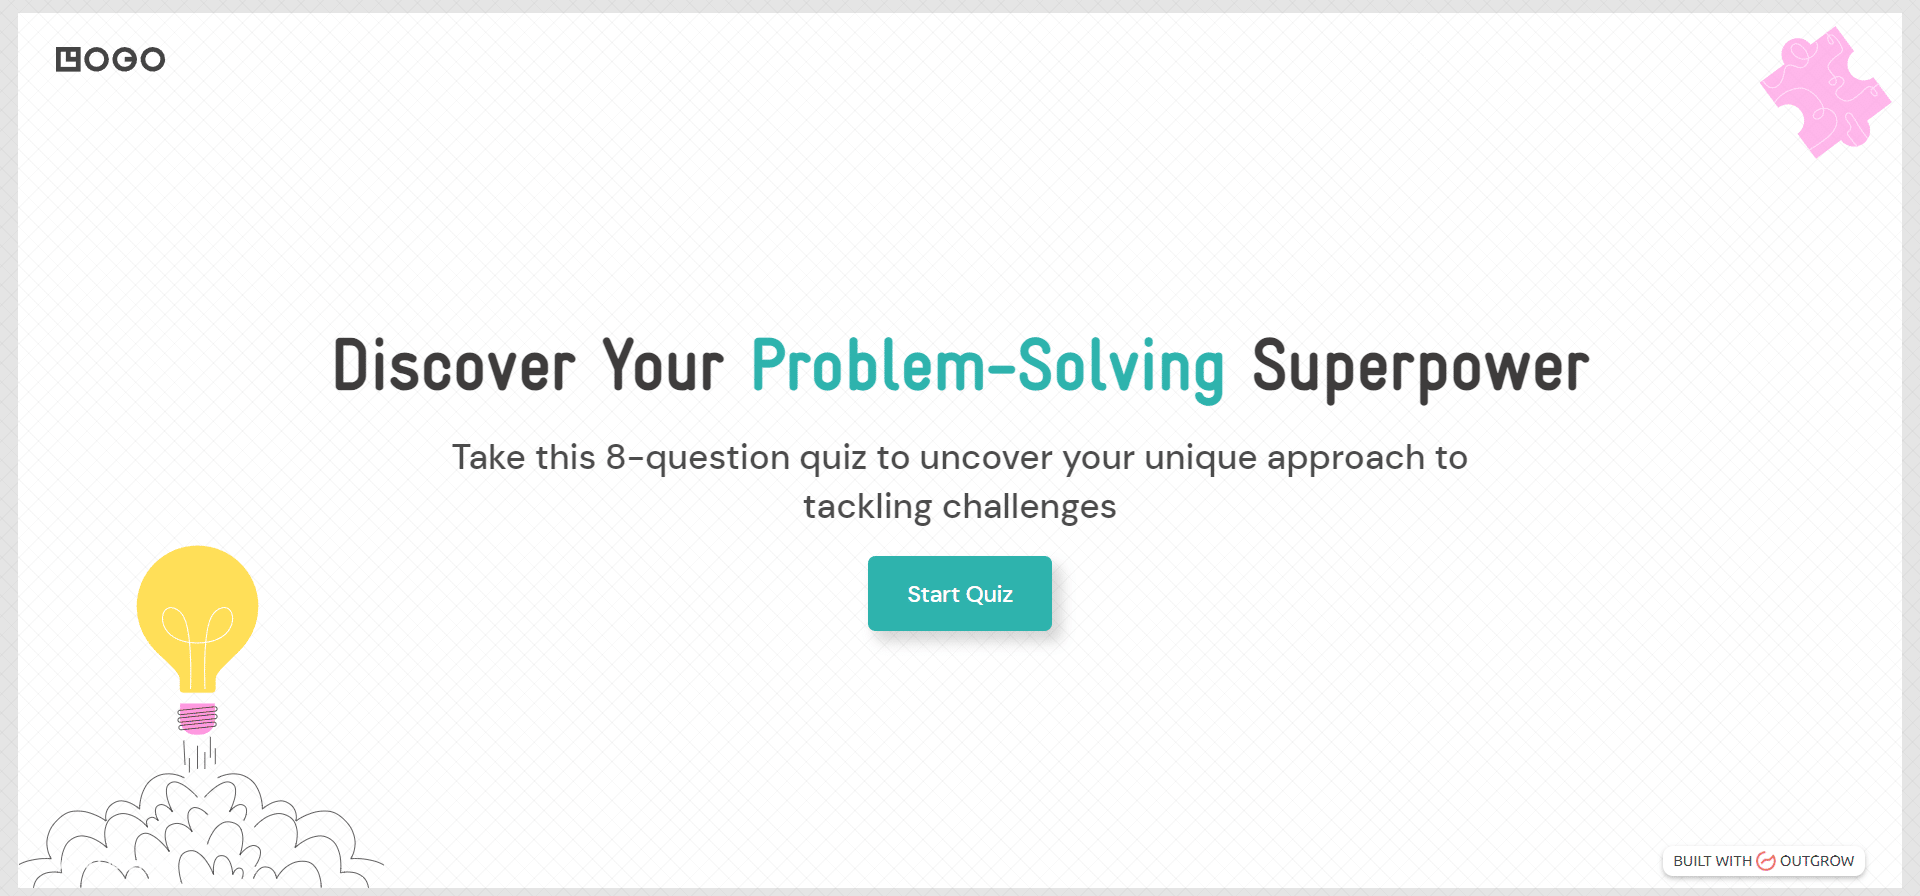 Discover Your Problem-Solving Superpower